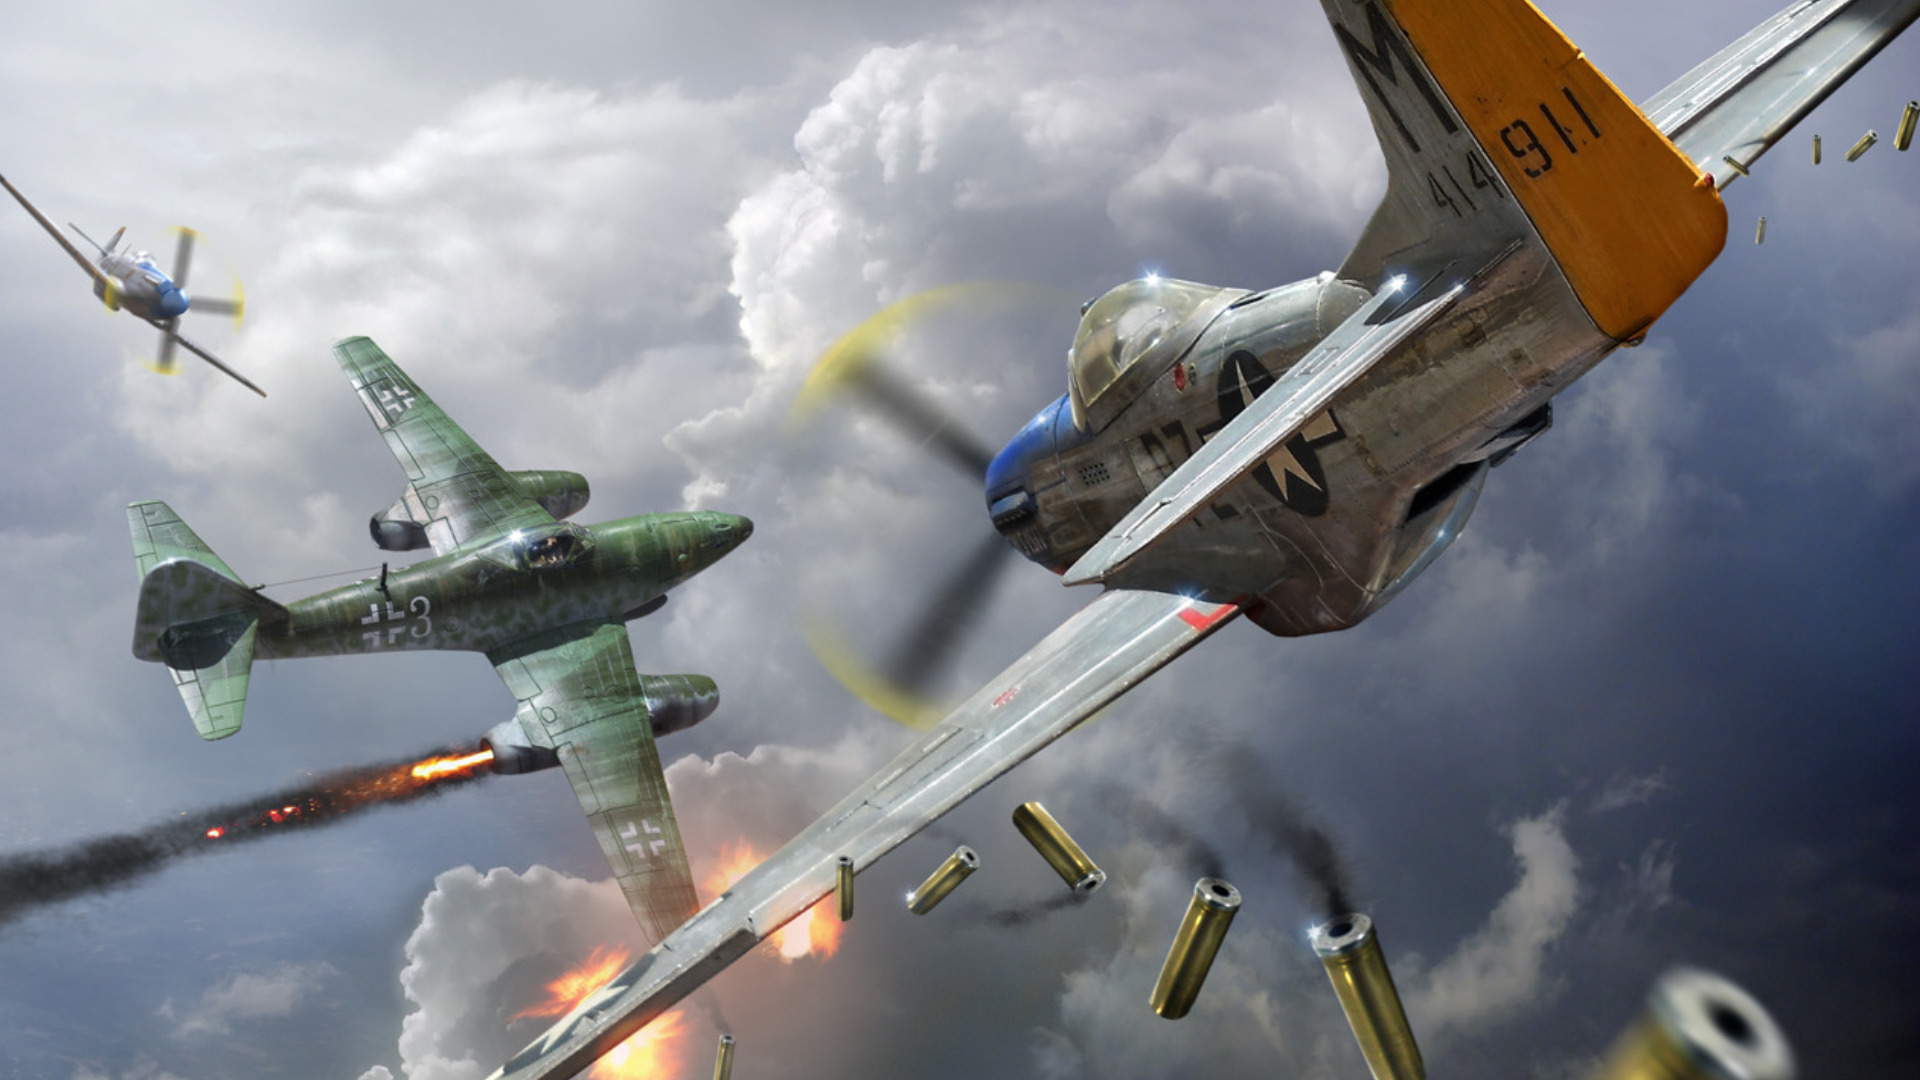 Ww2 Planes Background wallpapers HD   530596 1920x1080